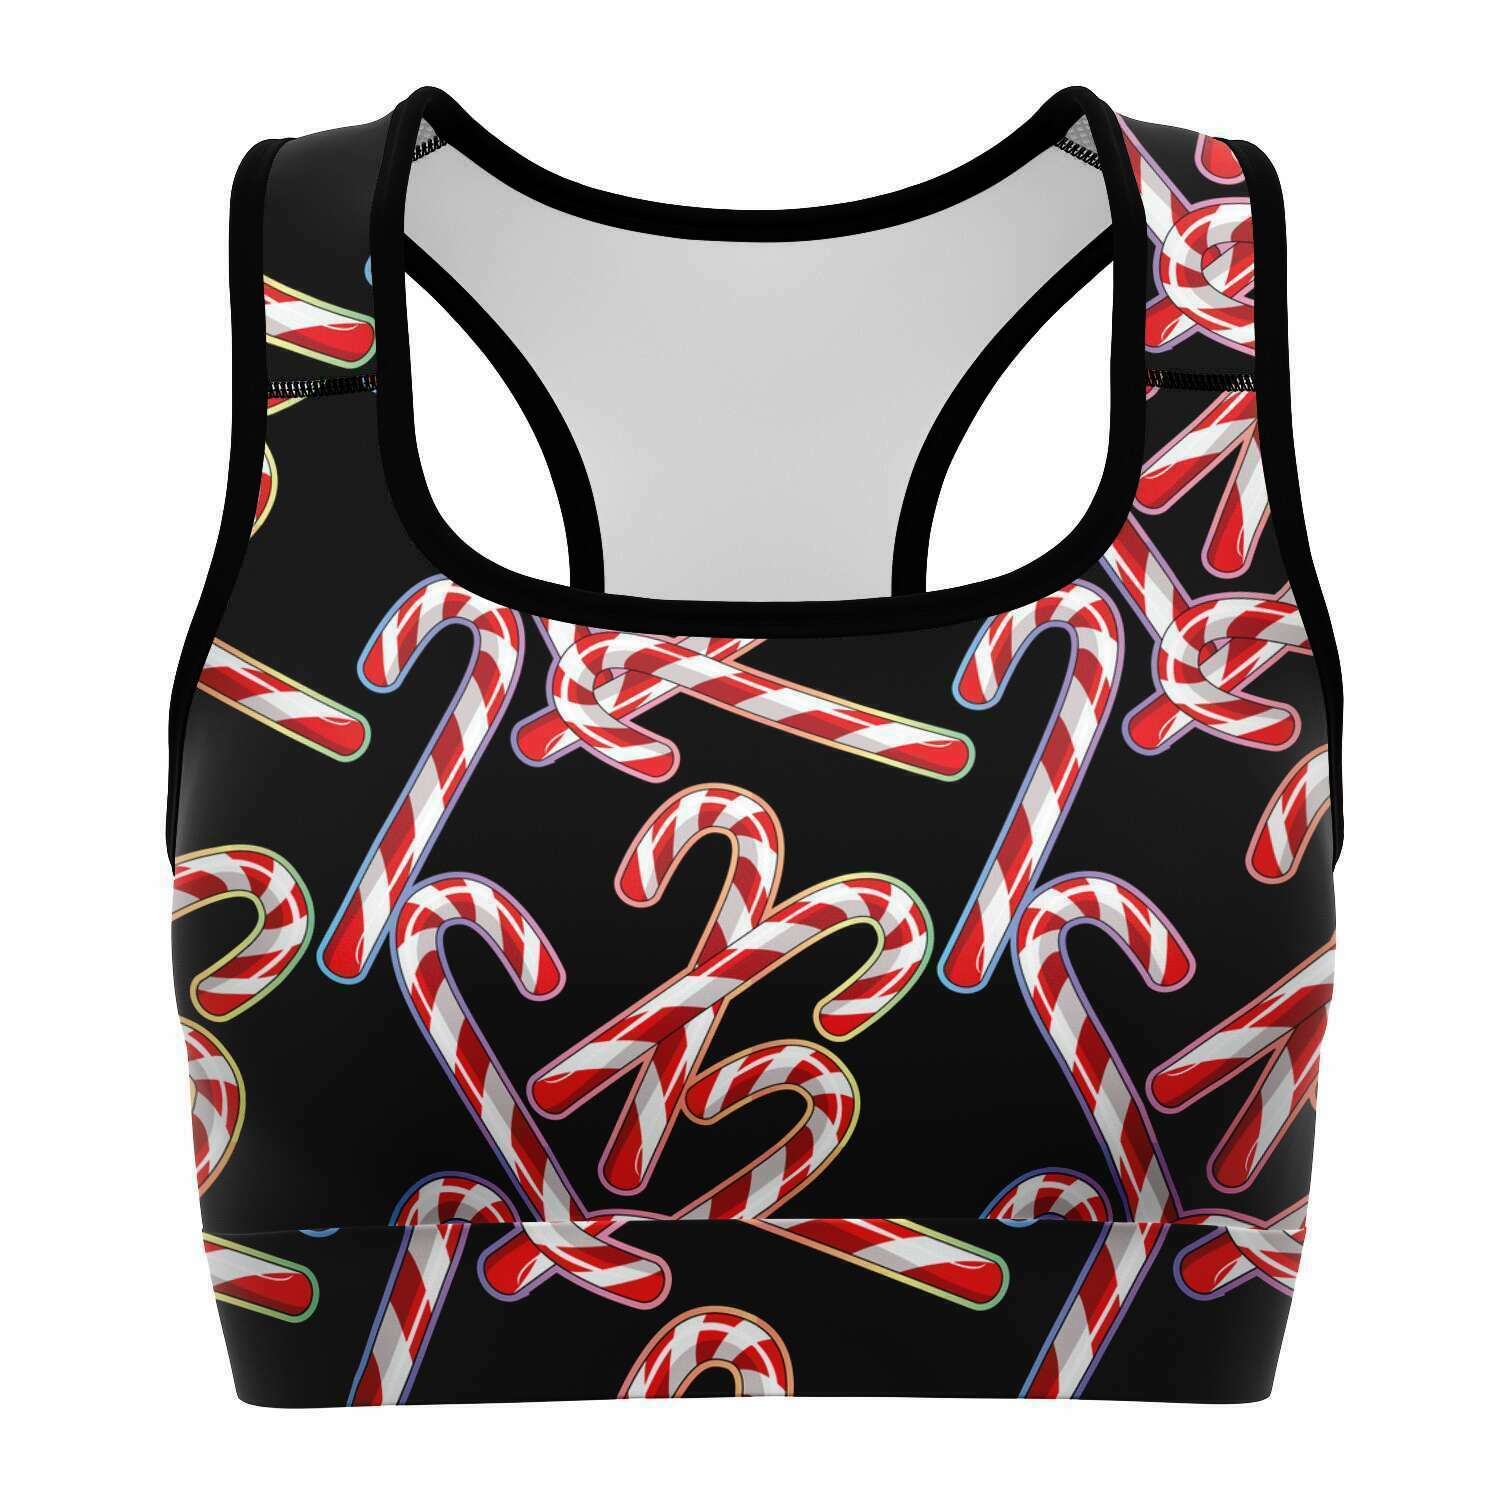 Women's Rainbow Christmas Candy Canes Athletic Sports Bra